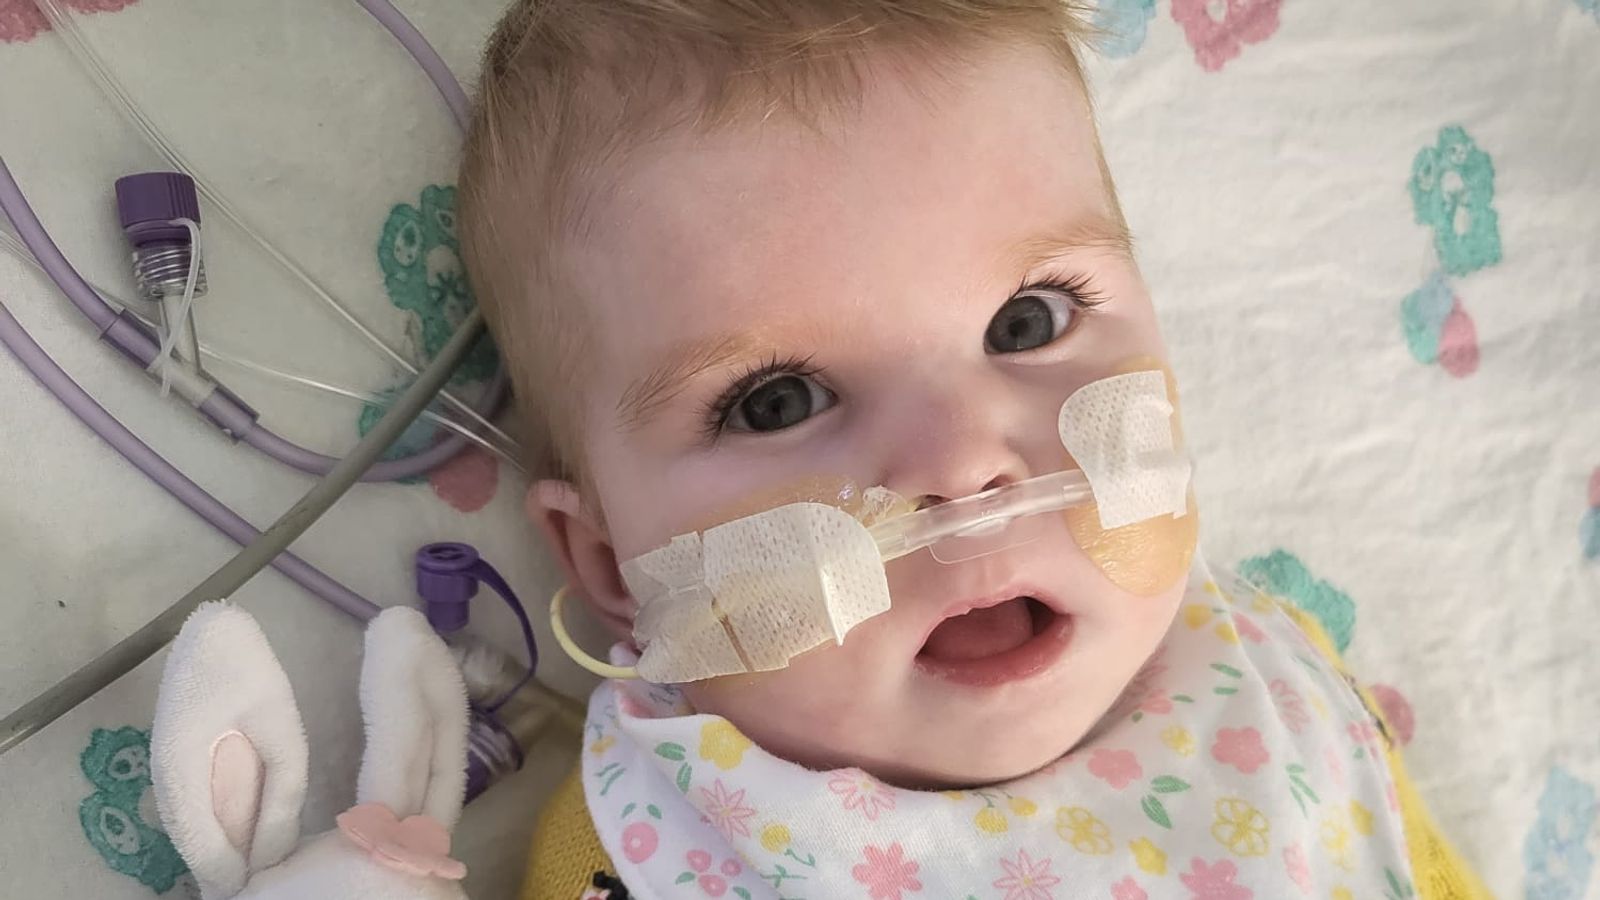 Indi Gregory's parents lose another round of life-support treatment fight for critically ill baby